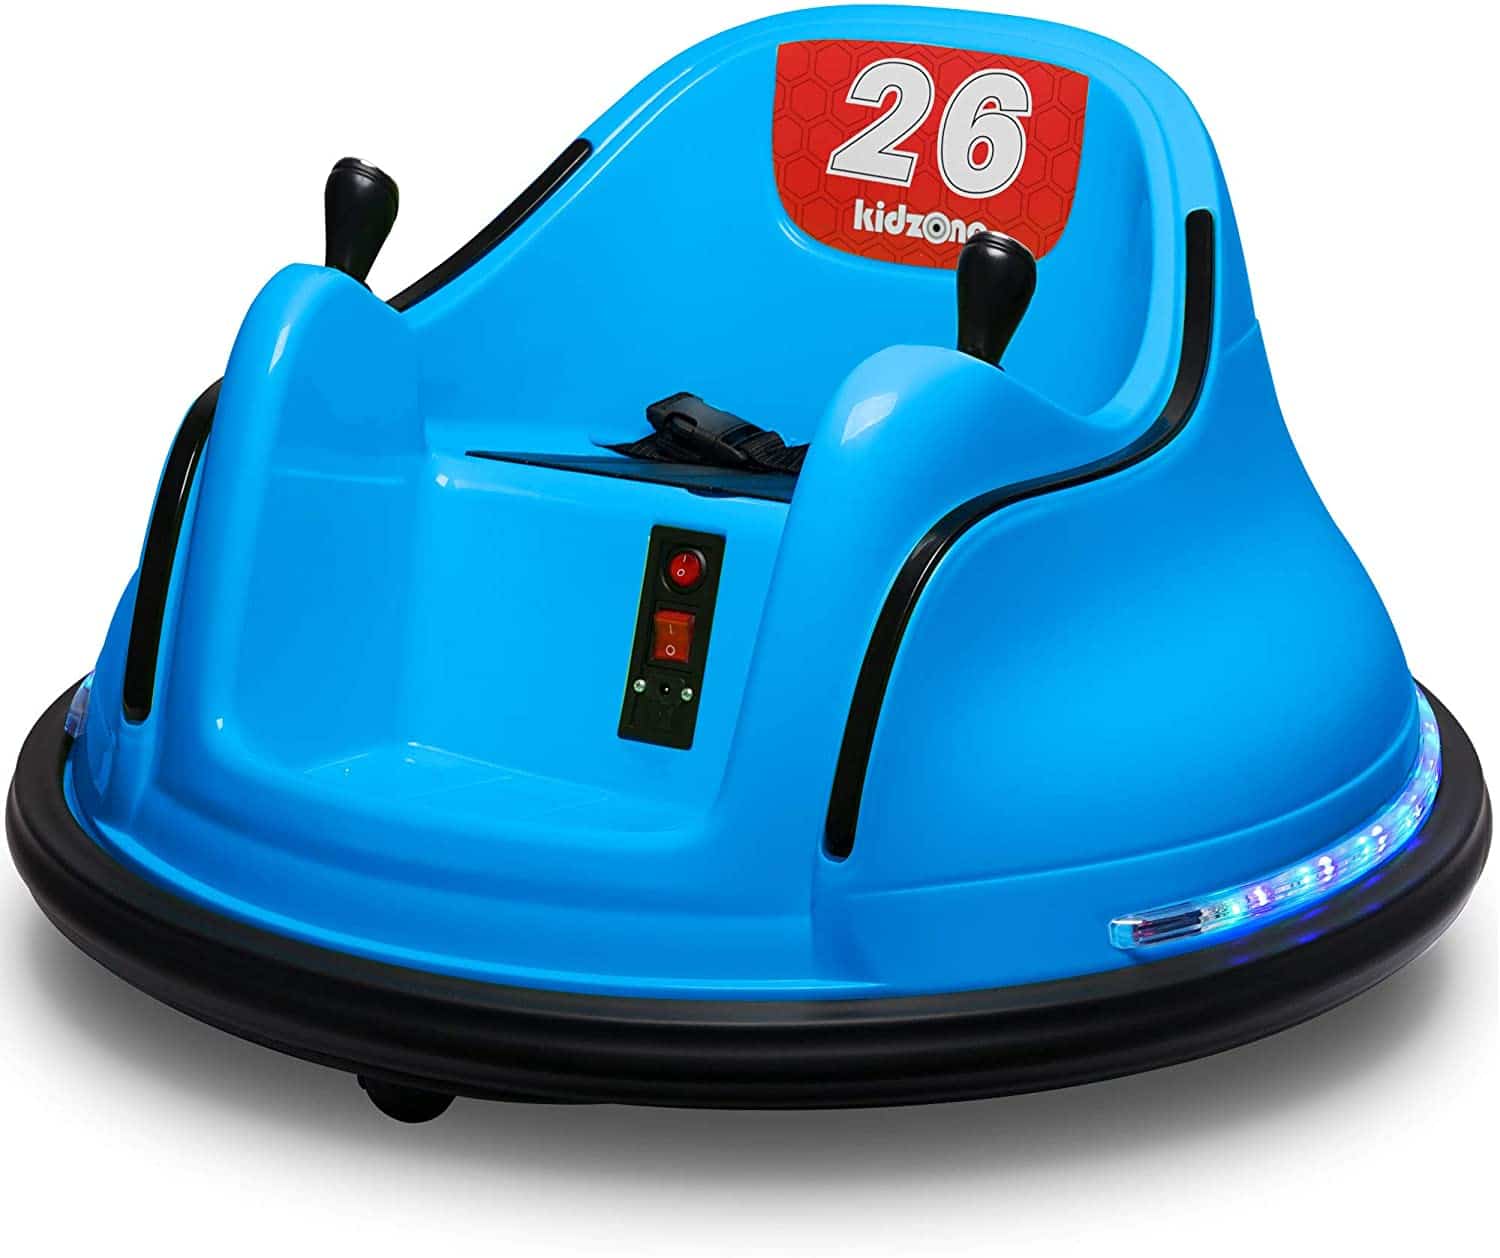 Kidzone DIY Sticker Race Car 6V Kids Toy Electric Ride On Bumper Car Vehicle with Remote Control, LED Lights & 360 Degree Spin, 2 Driving Modes, ASTM Certified - Blue